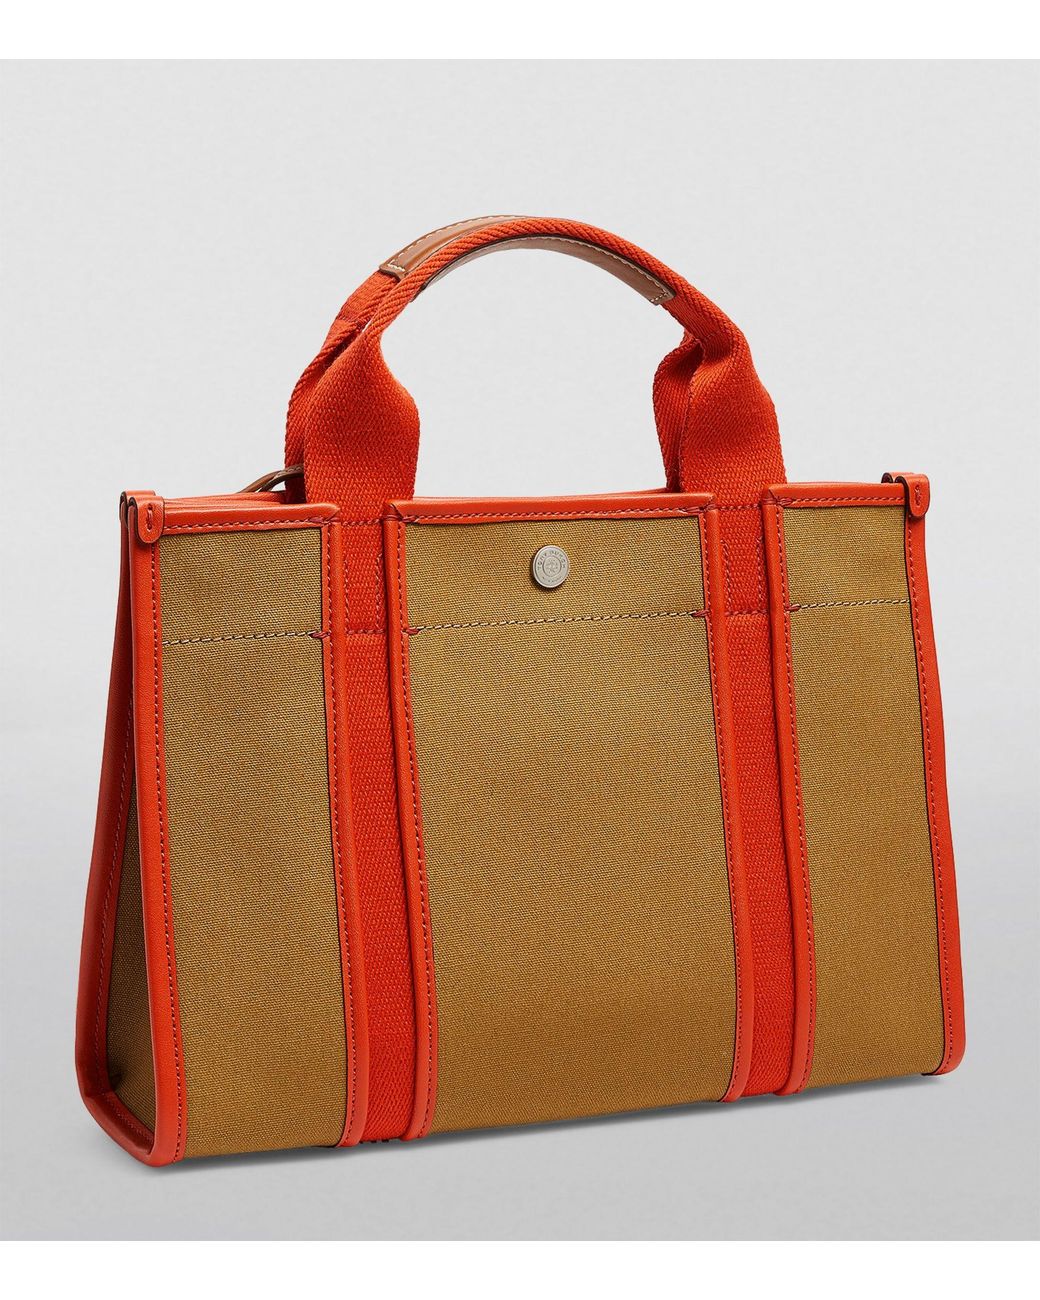 Tory Burch Tory Twill Tote Bag in Red | Lyst Canada